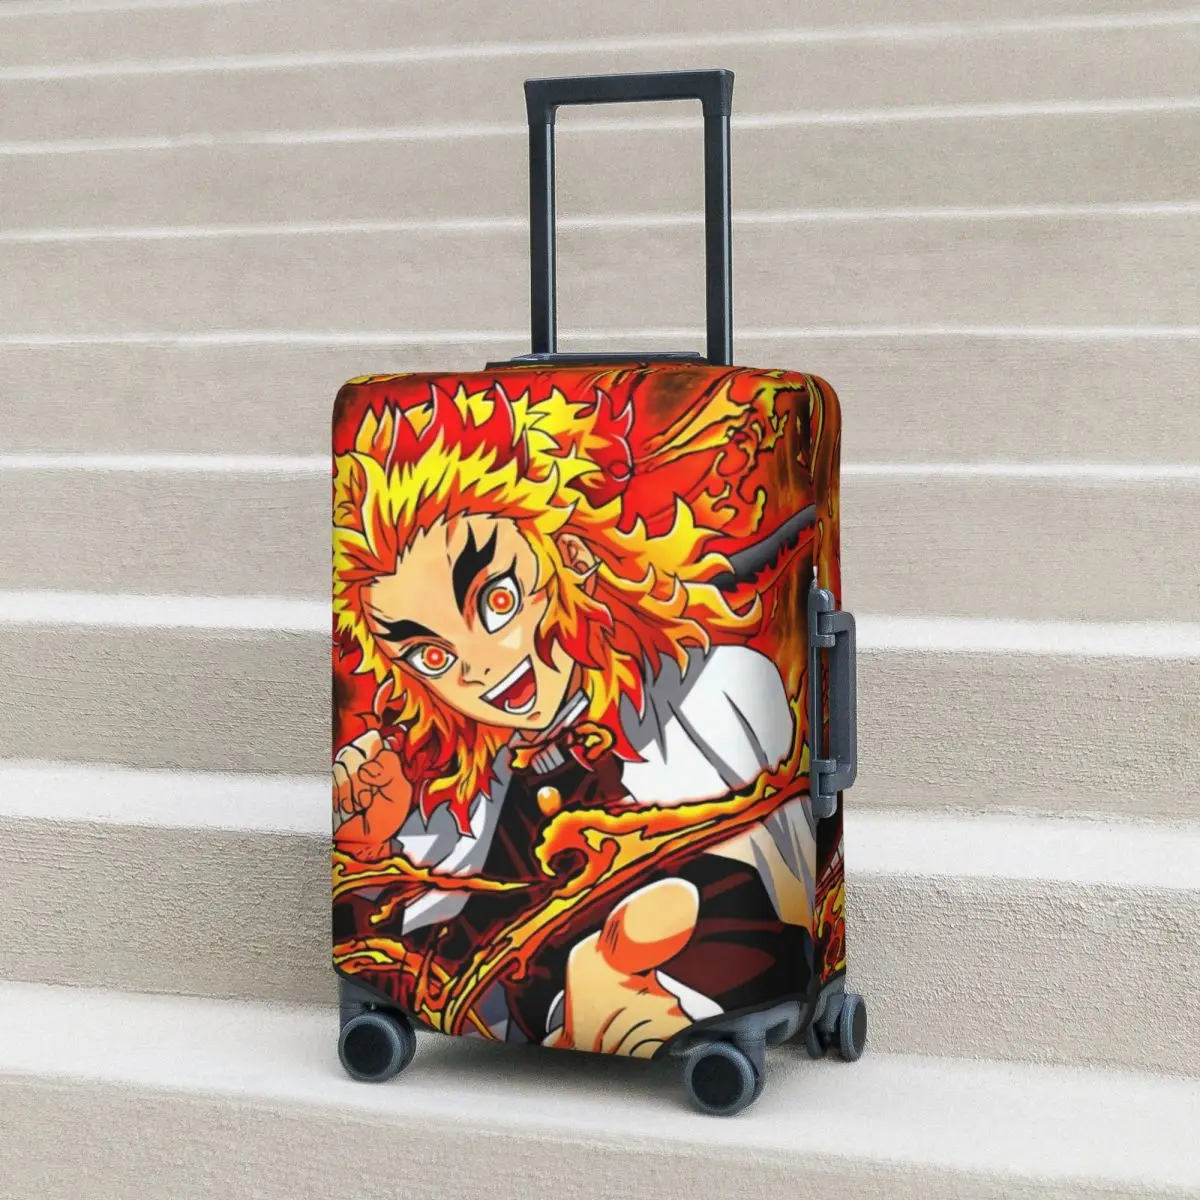 

Demon Slayer Anime Suitcase Cover The Flame Hashira Cruise Trip Holiday Elastic Luggage Supplies Protection